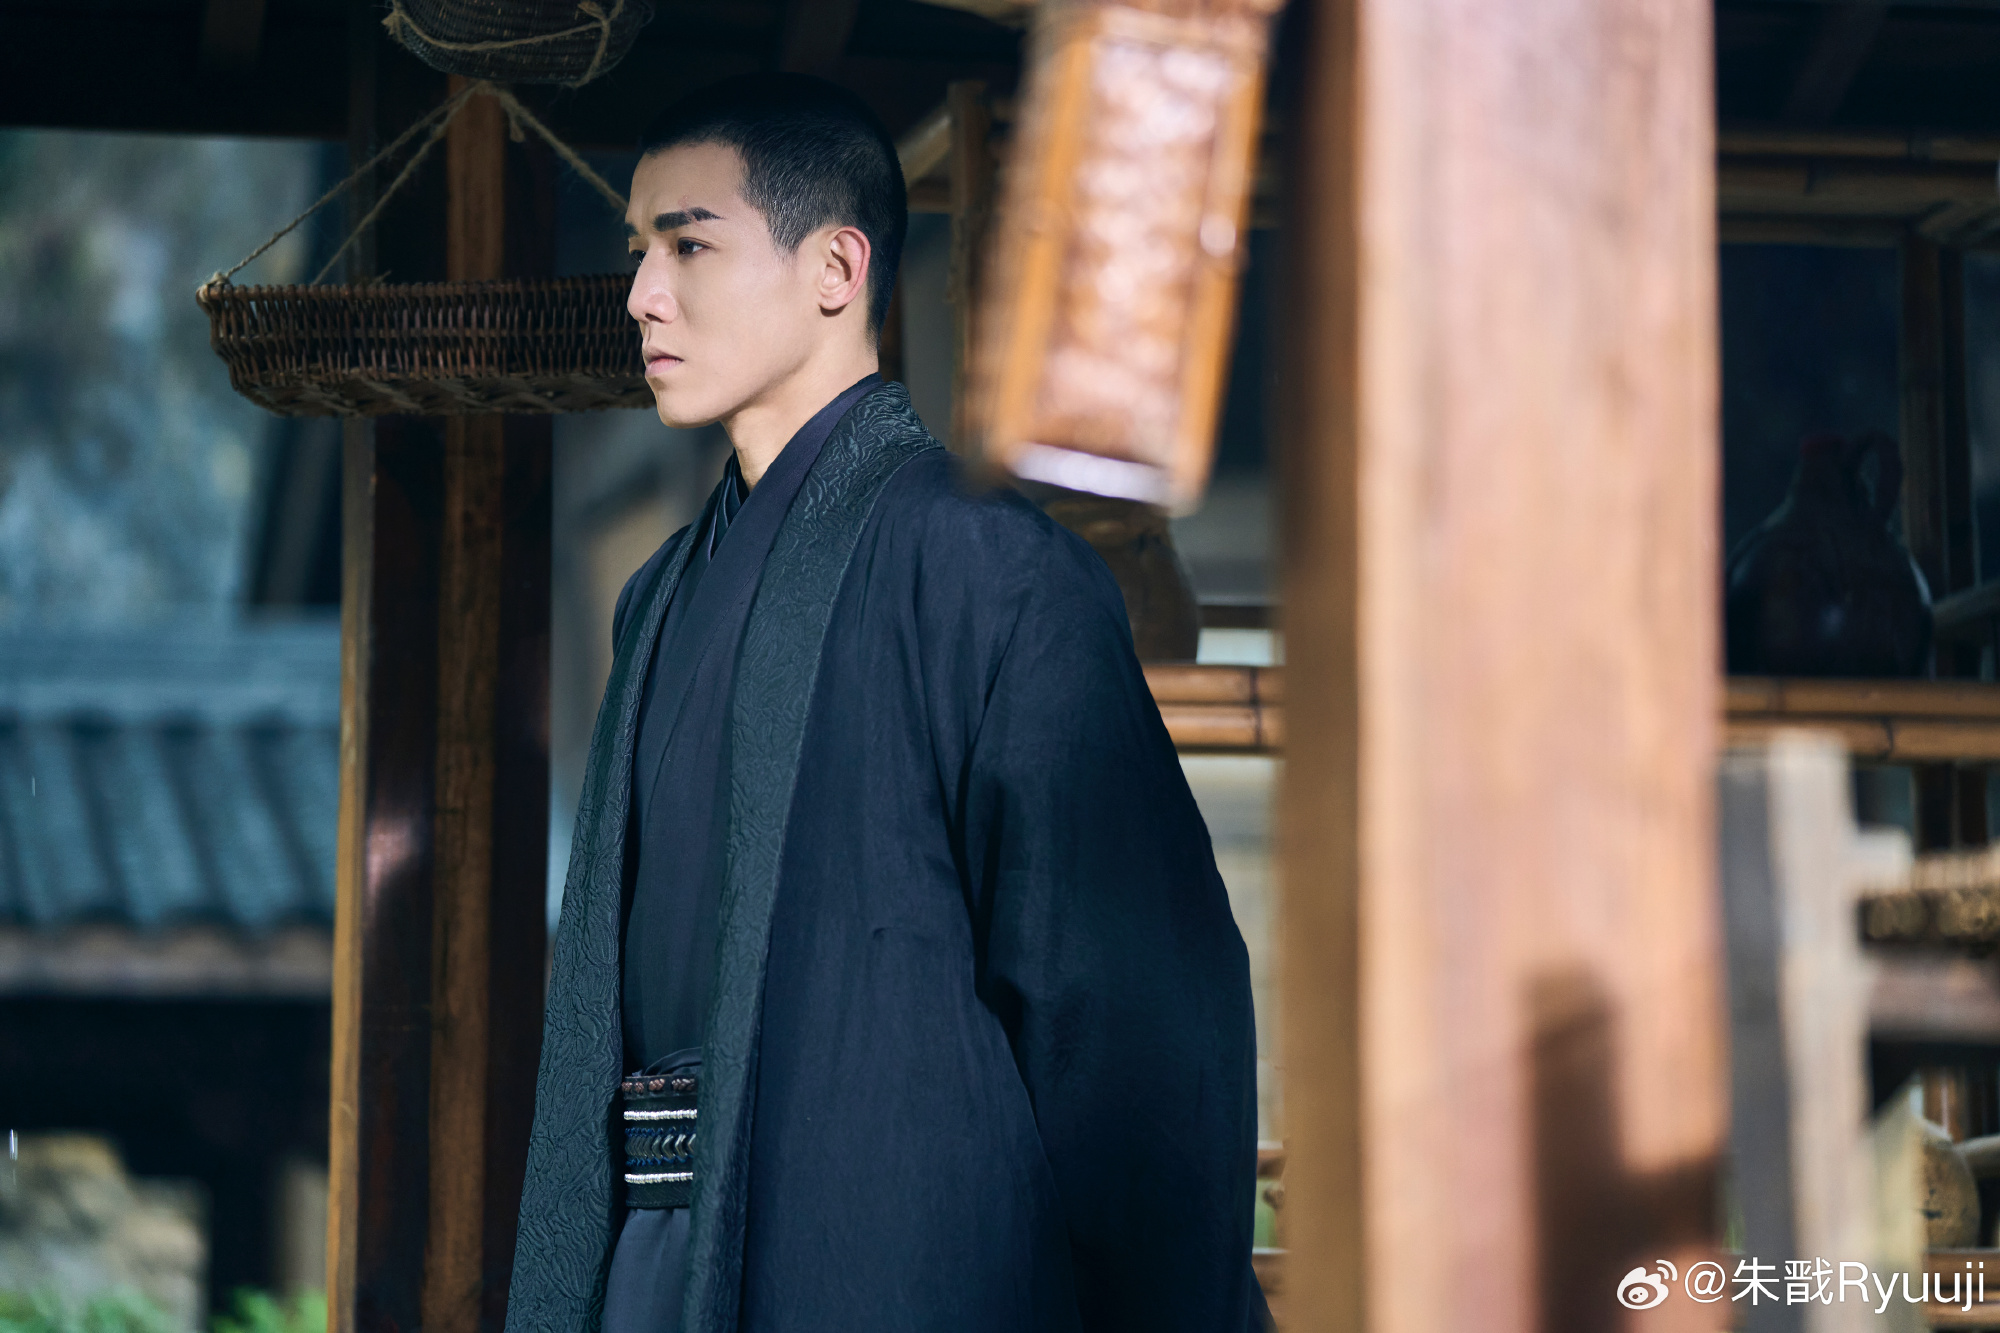 Post: #云之羽 寒鸦柒这小寸头怎么还不扑街 😡 ​​​
#MyJourneyToYou Cold Crow Seven how come this little inch hasn't pounced 😡
